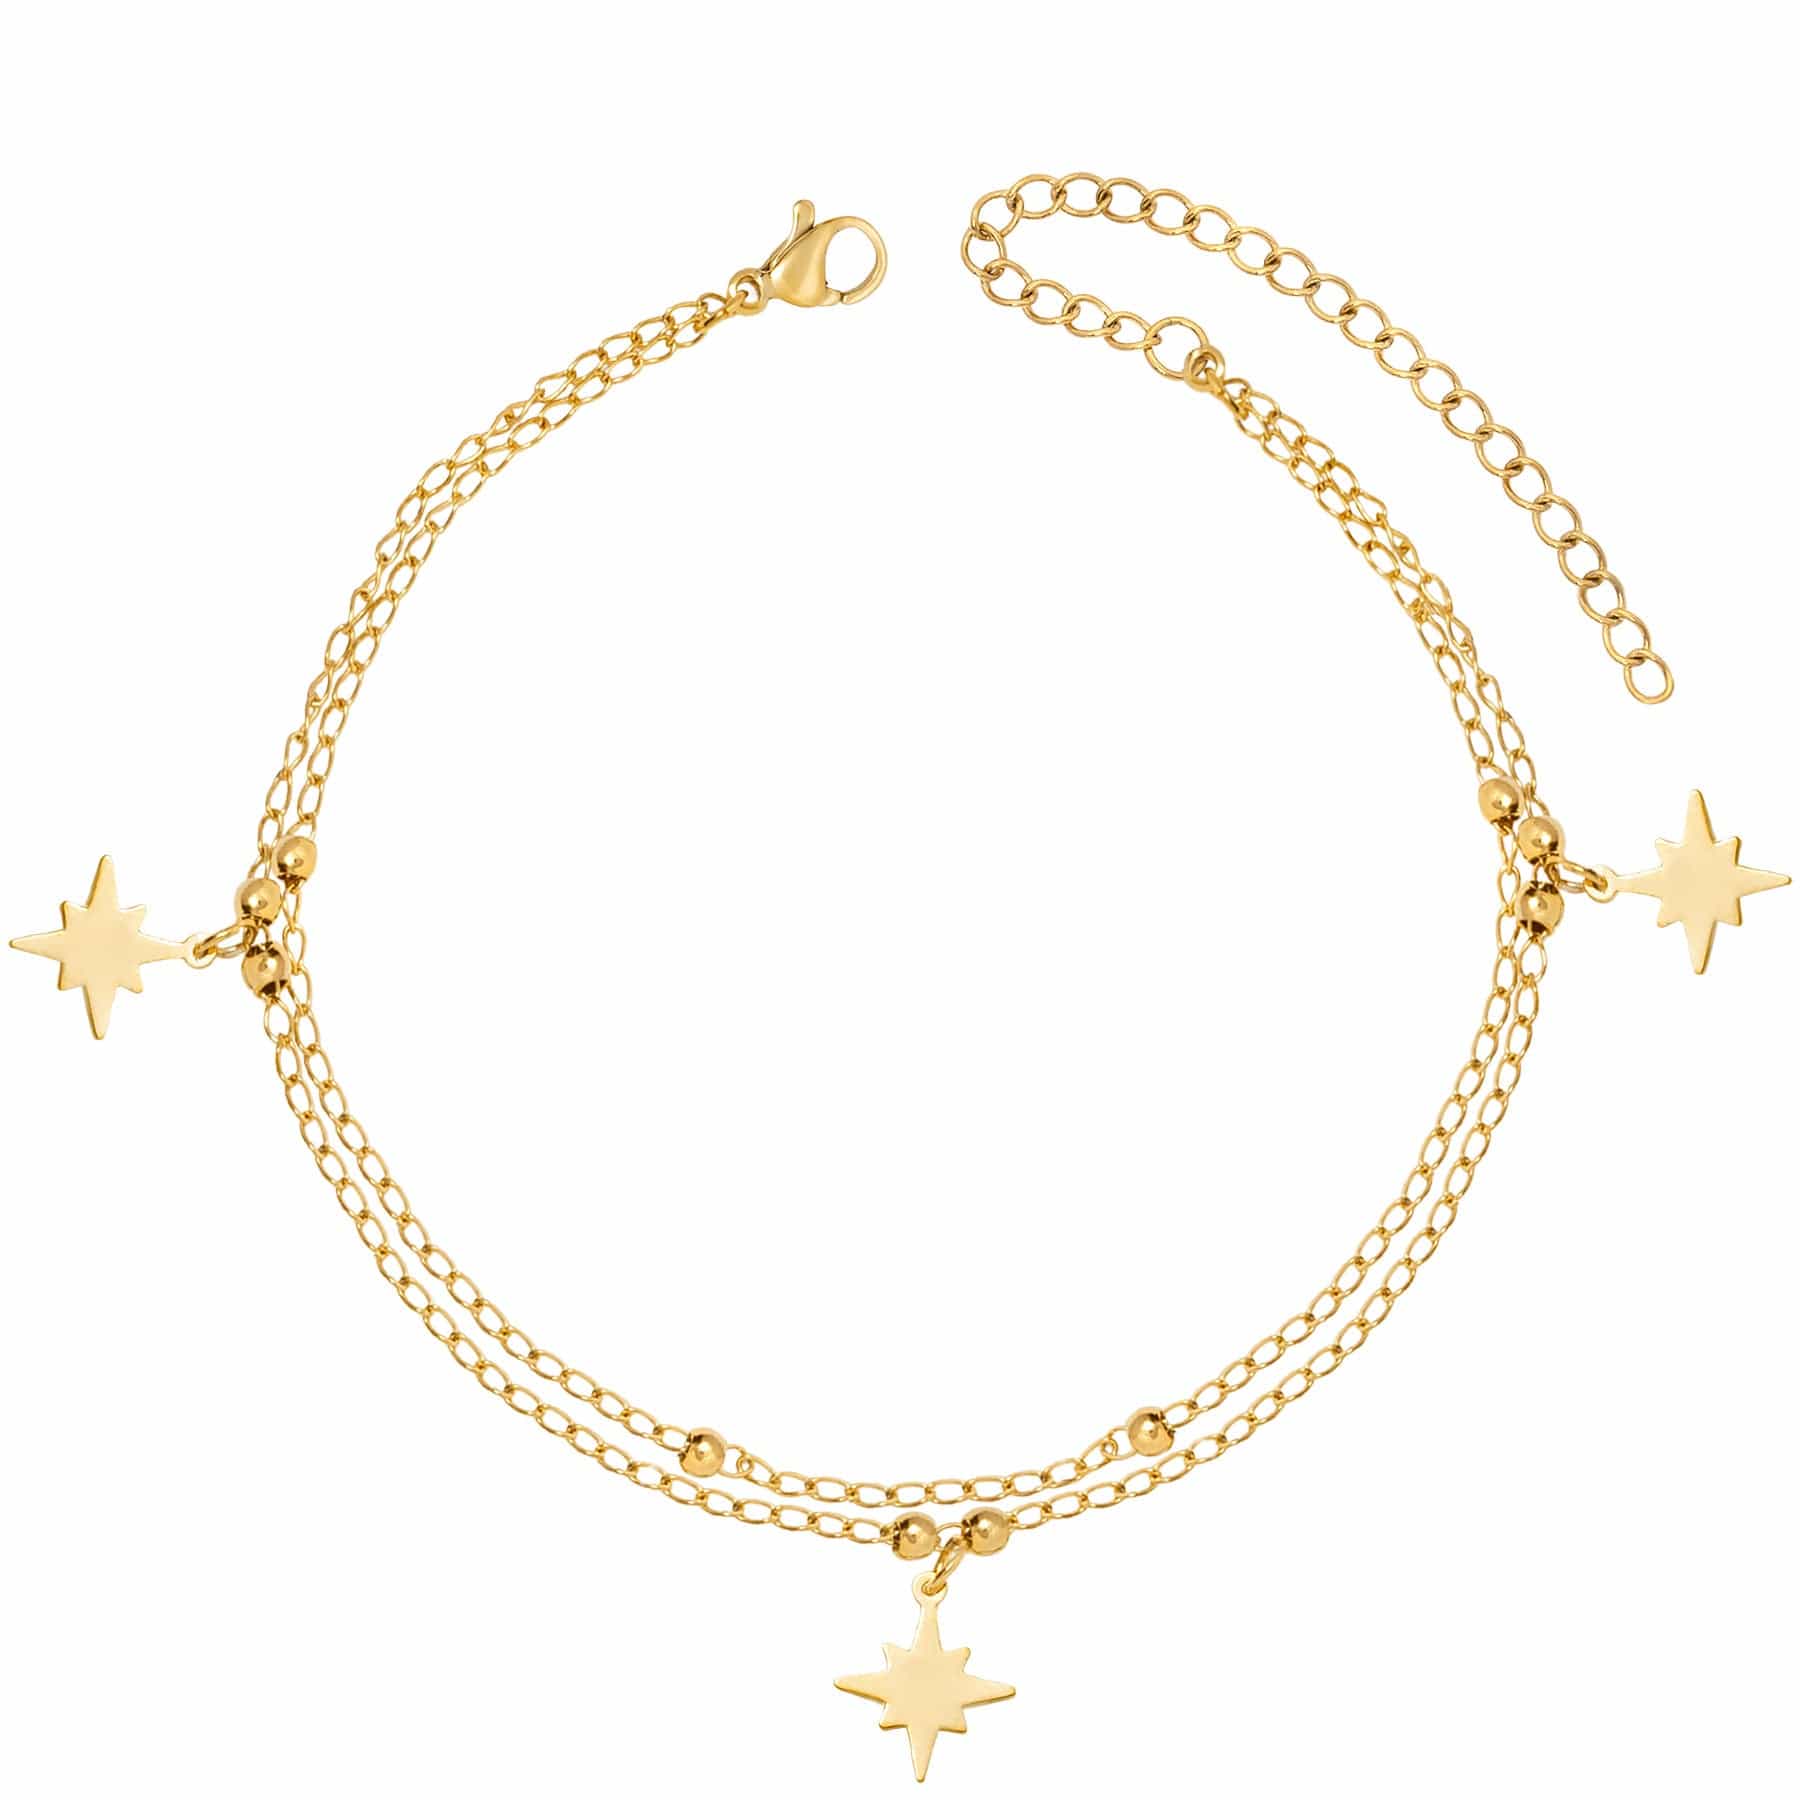 BohoMoon Stainless Steel Twilight Anklet Gold